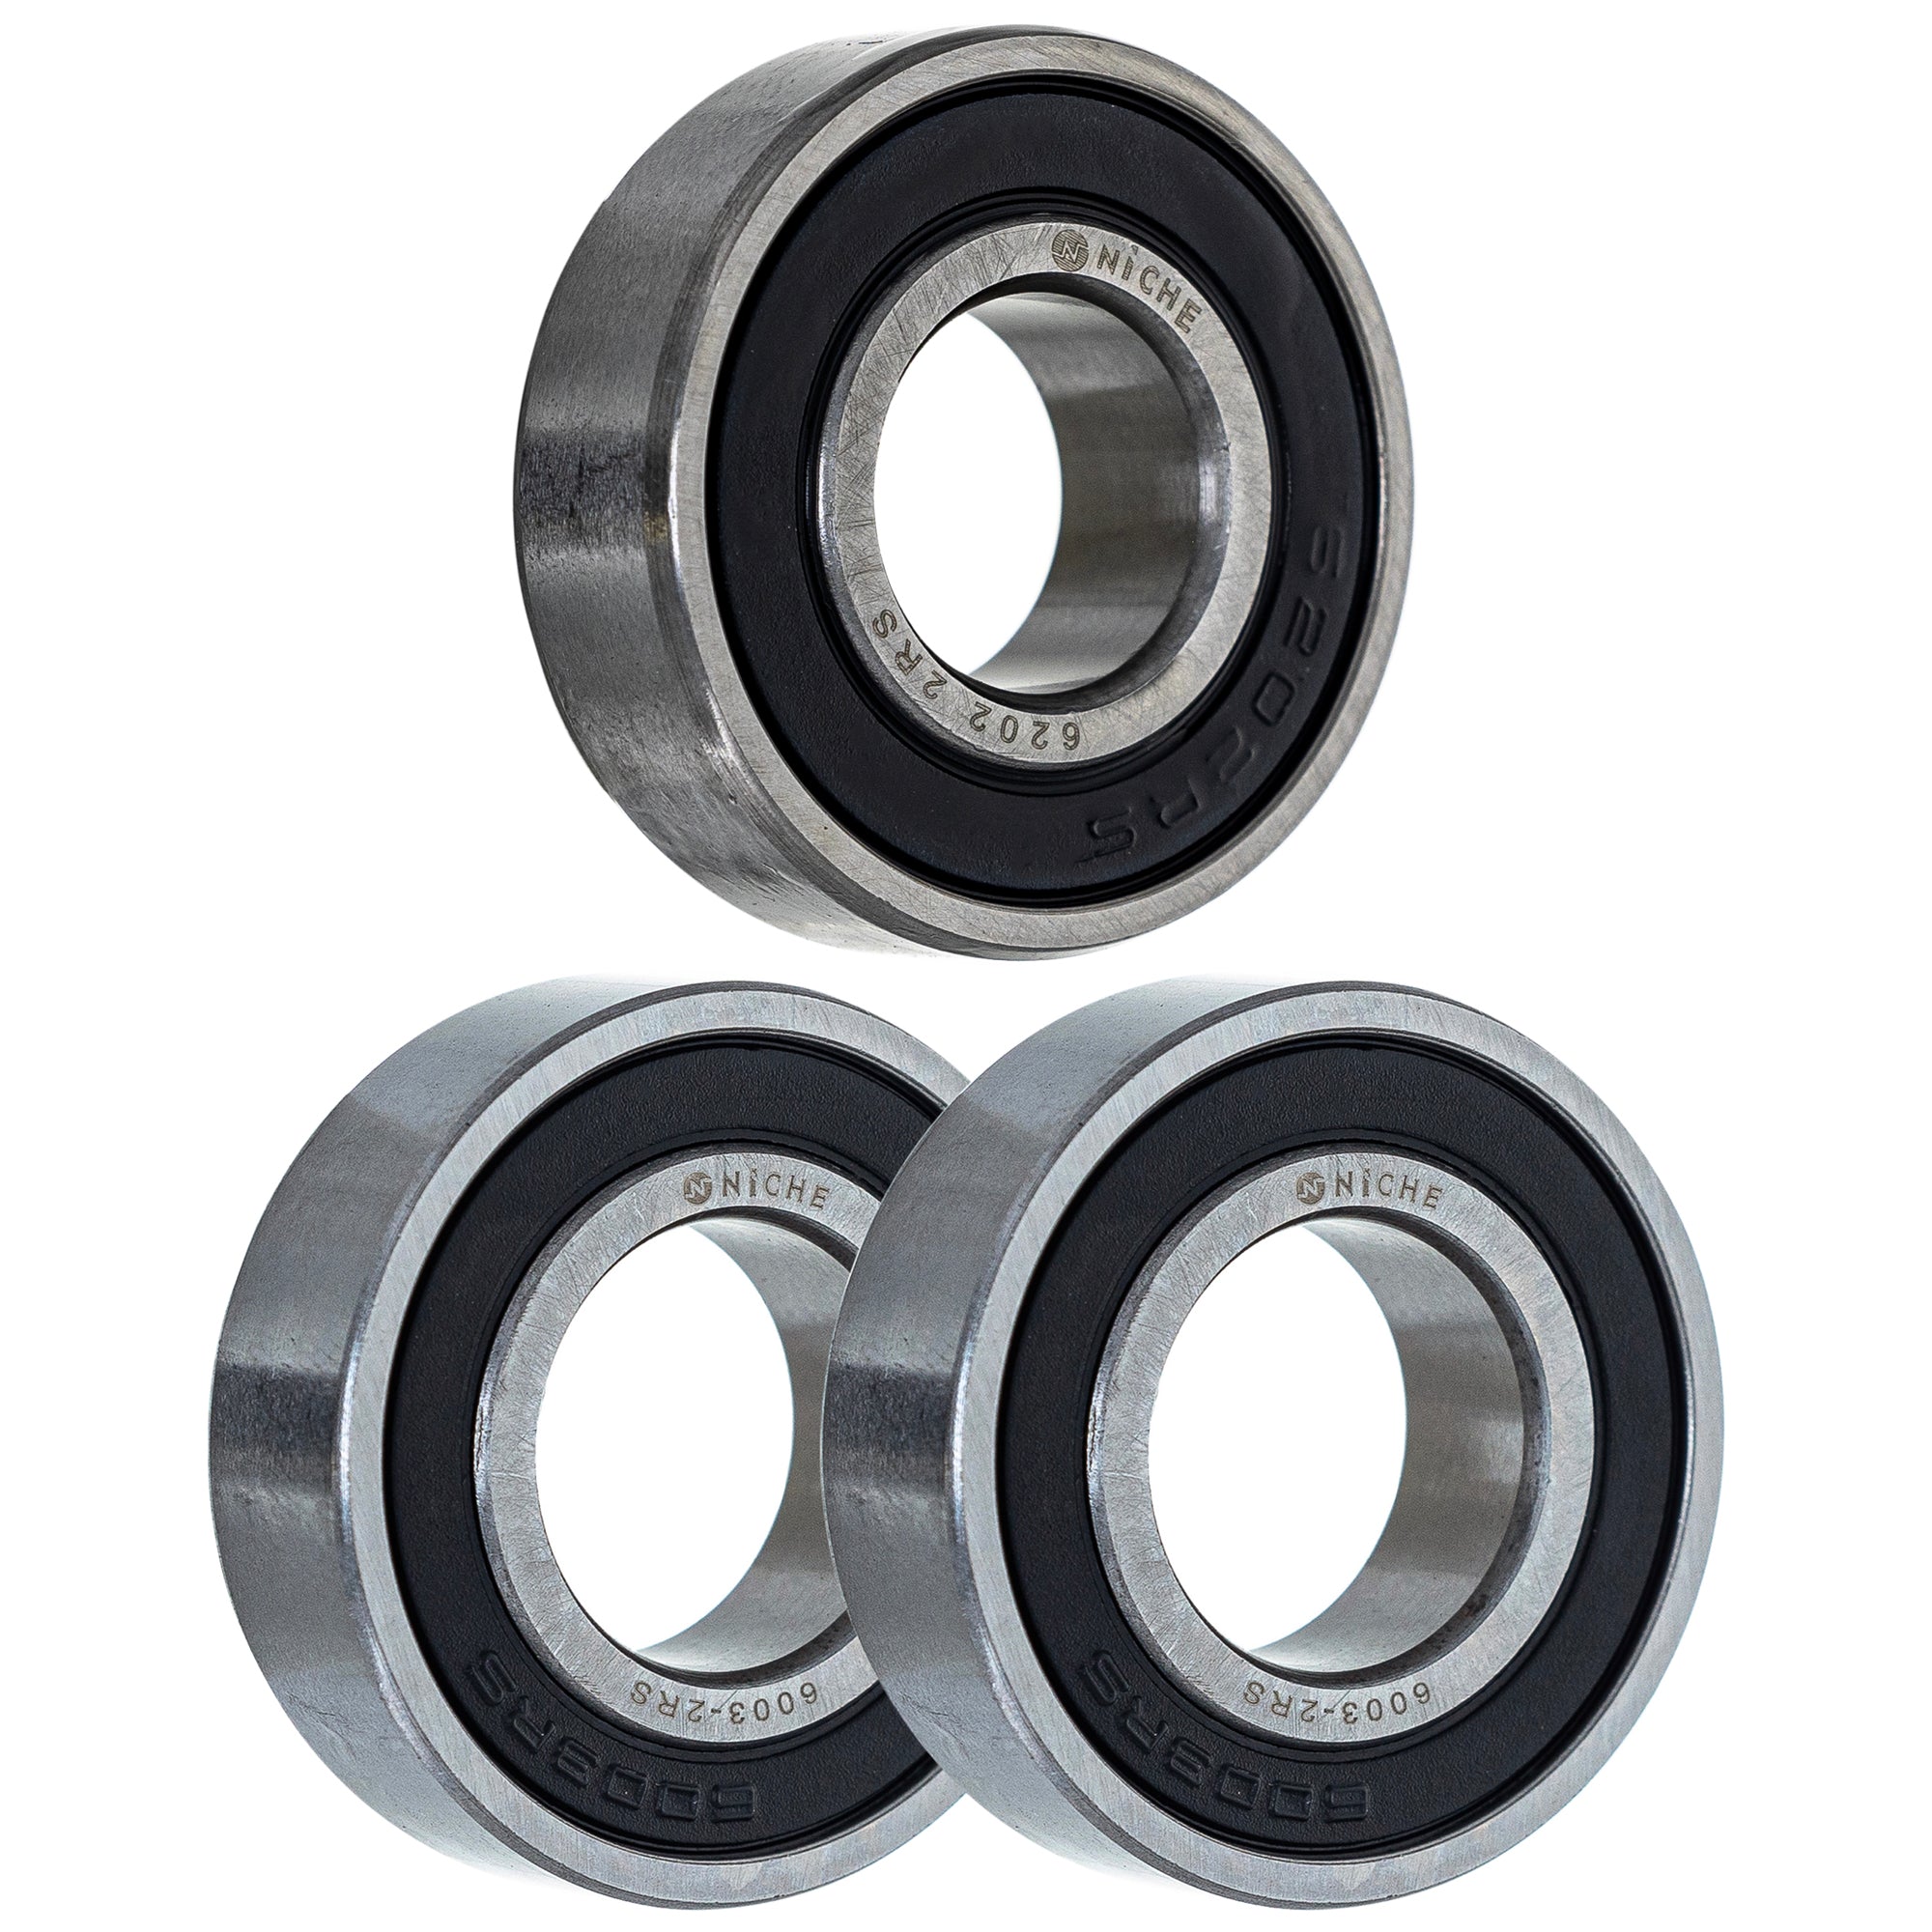 Wheel Bearing Kit for zOTHER Ref No TC50 SX-E EE 50 NICHE MK1009084